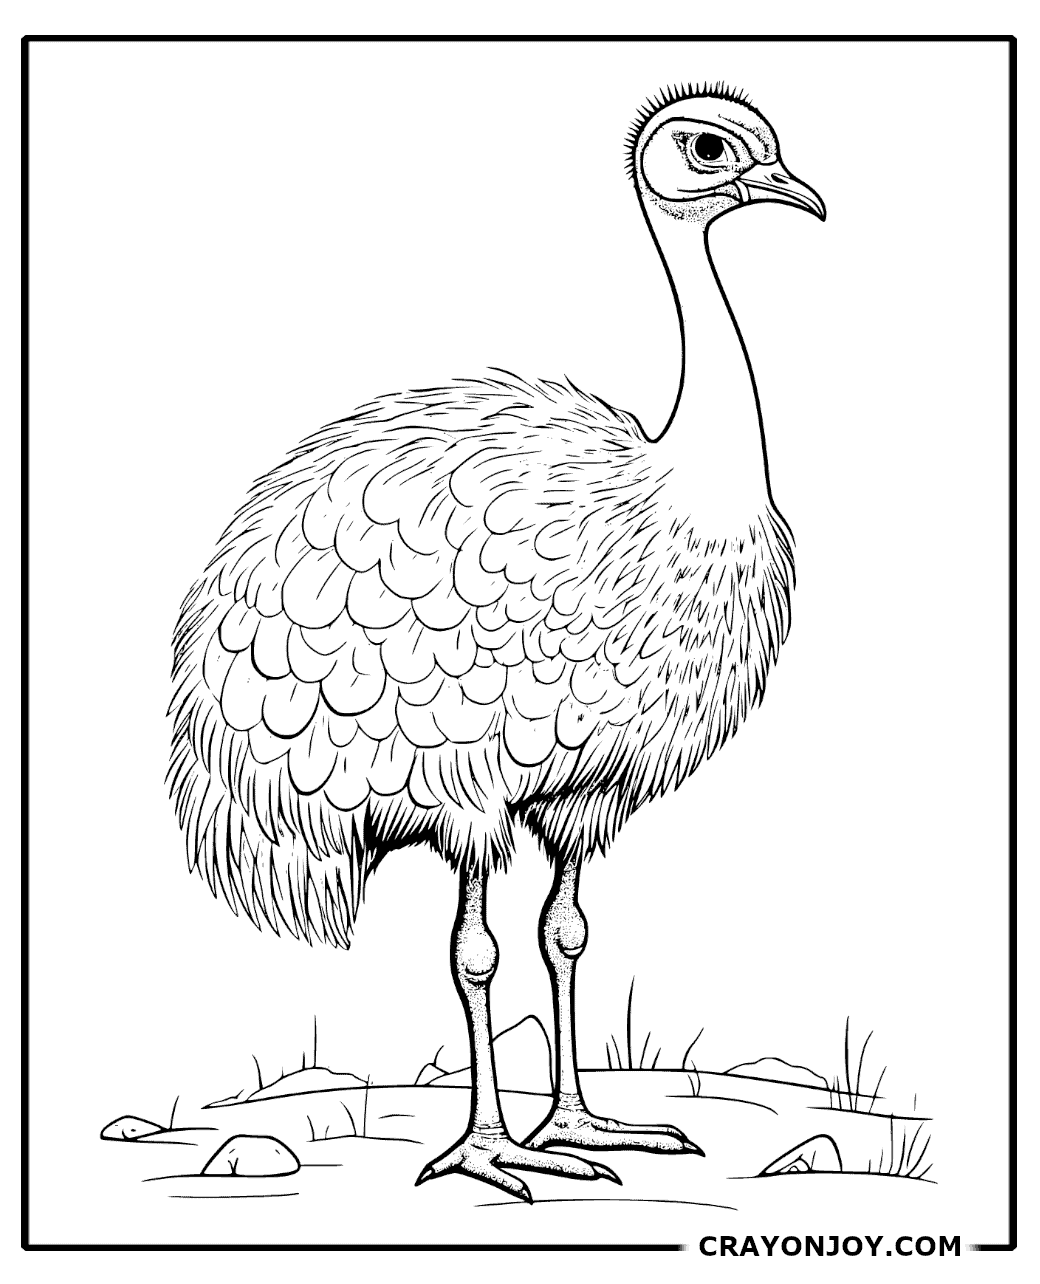 Emu Coloring Pages: Free Printable Sheets for Kids and Adults